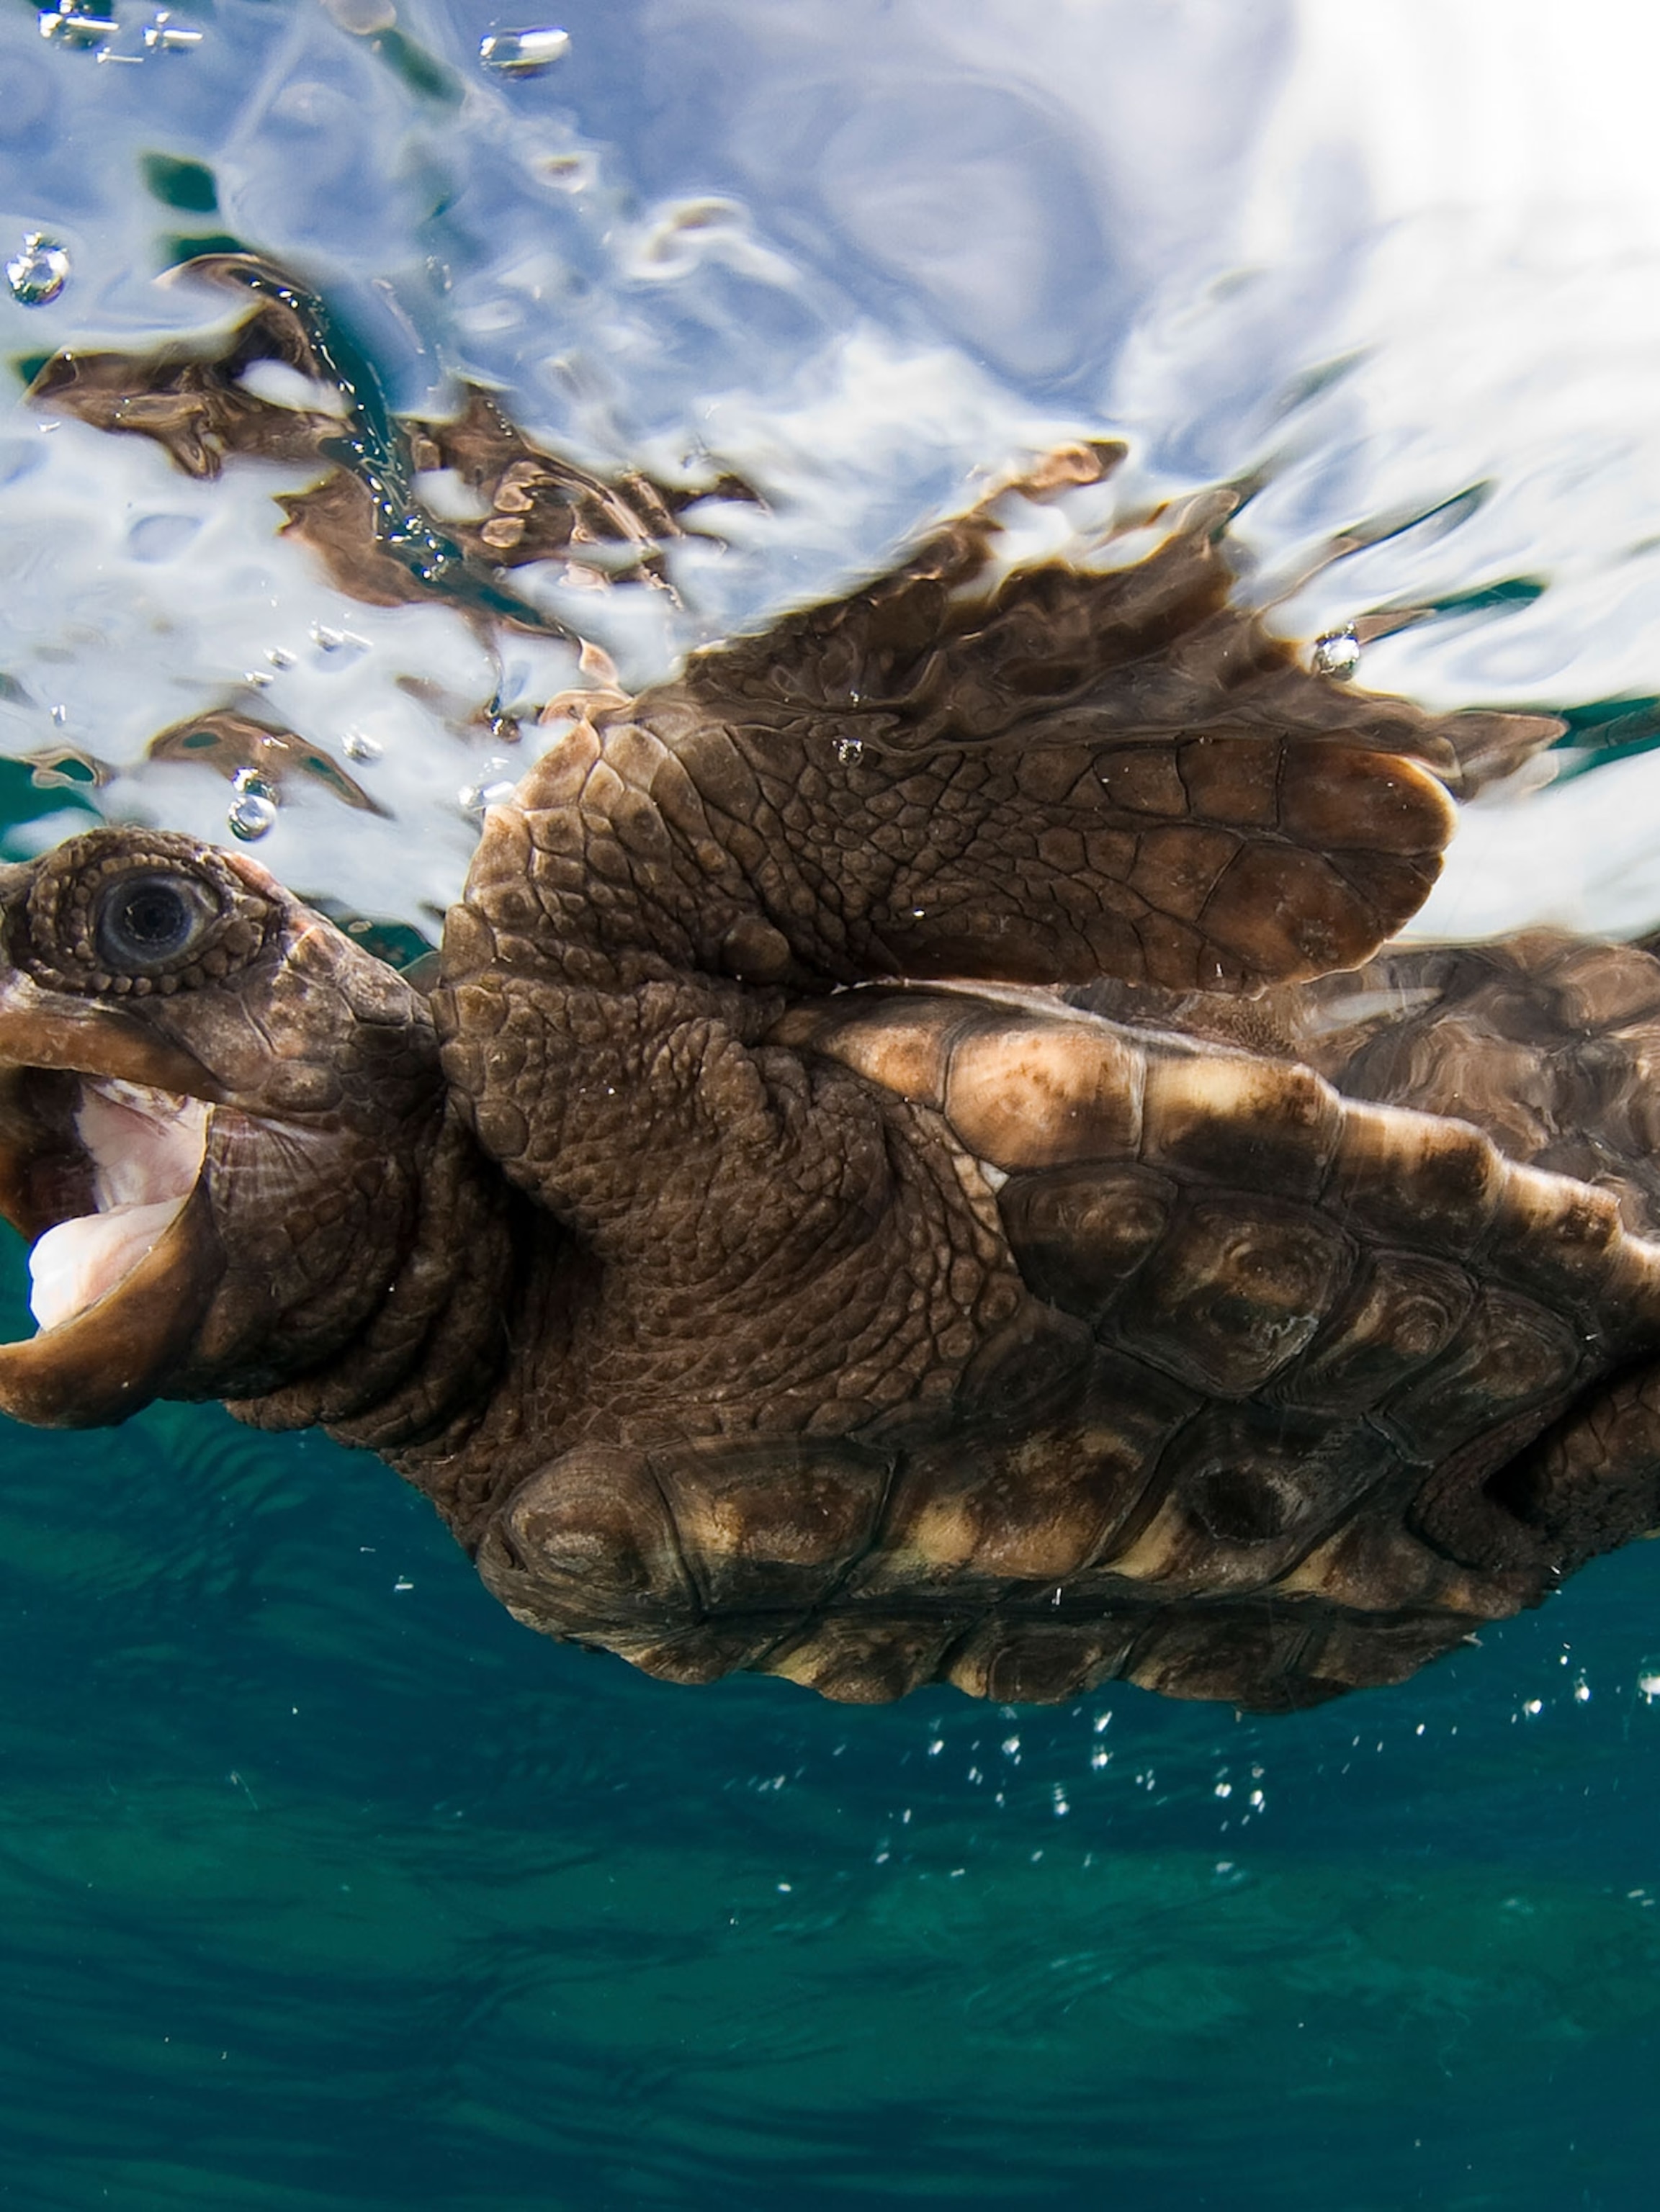 Graceful Pictures Of Rare Sea Turtles